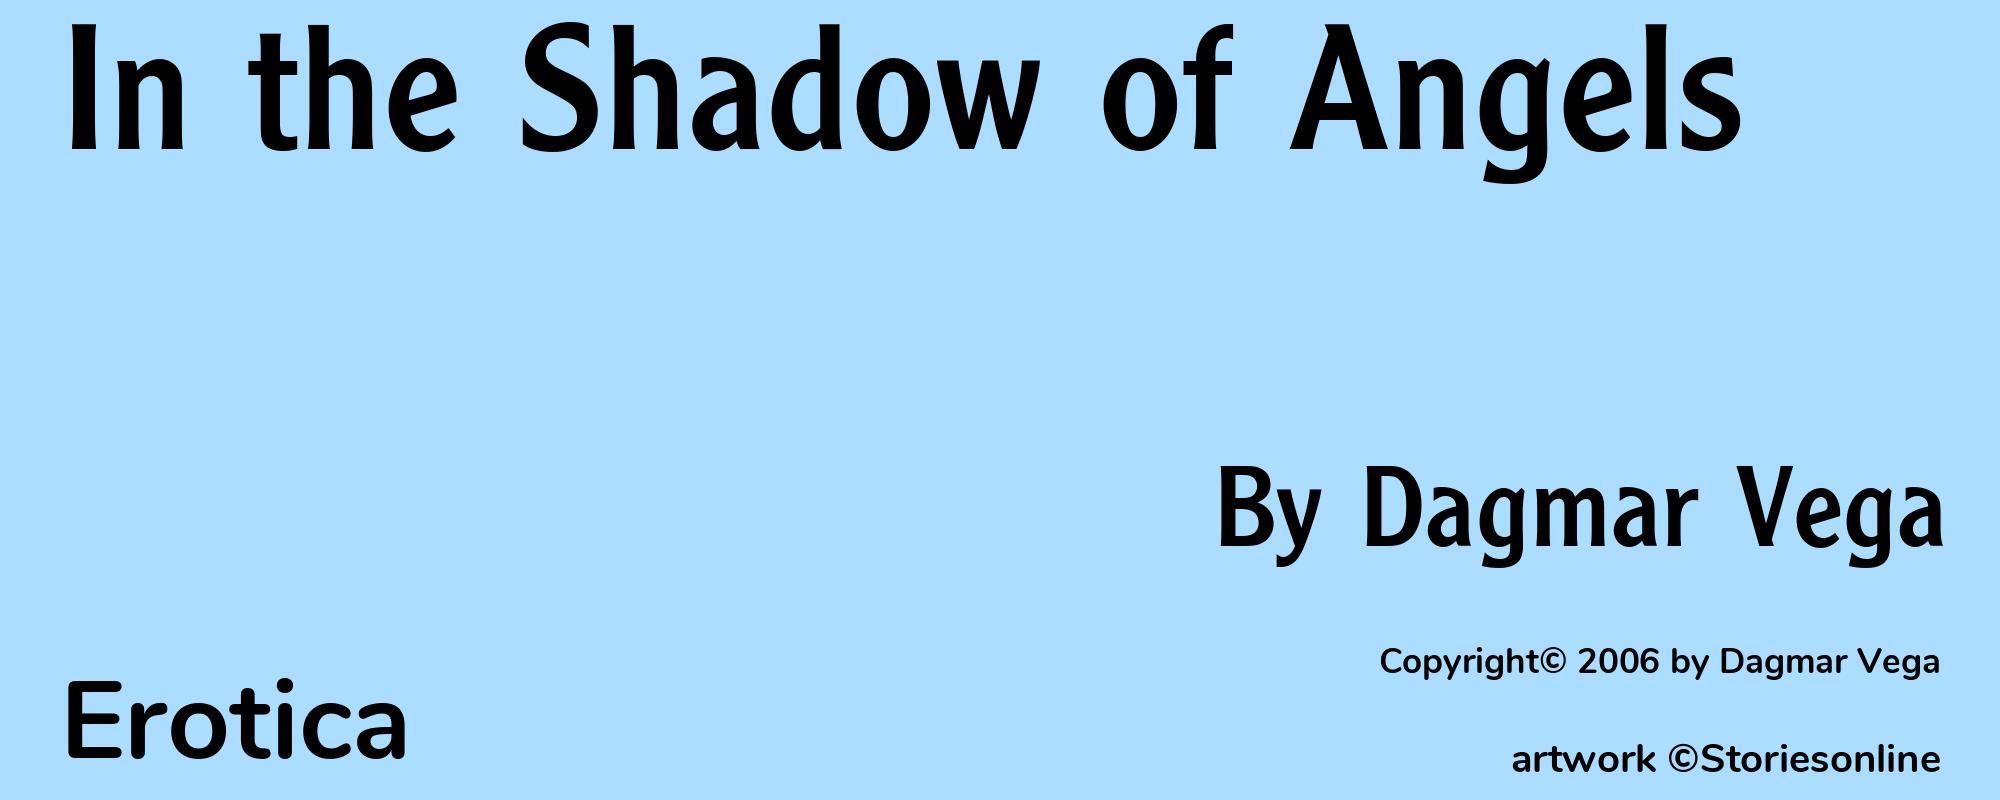 In the Shadow of Angels - Cover